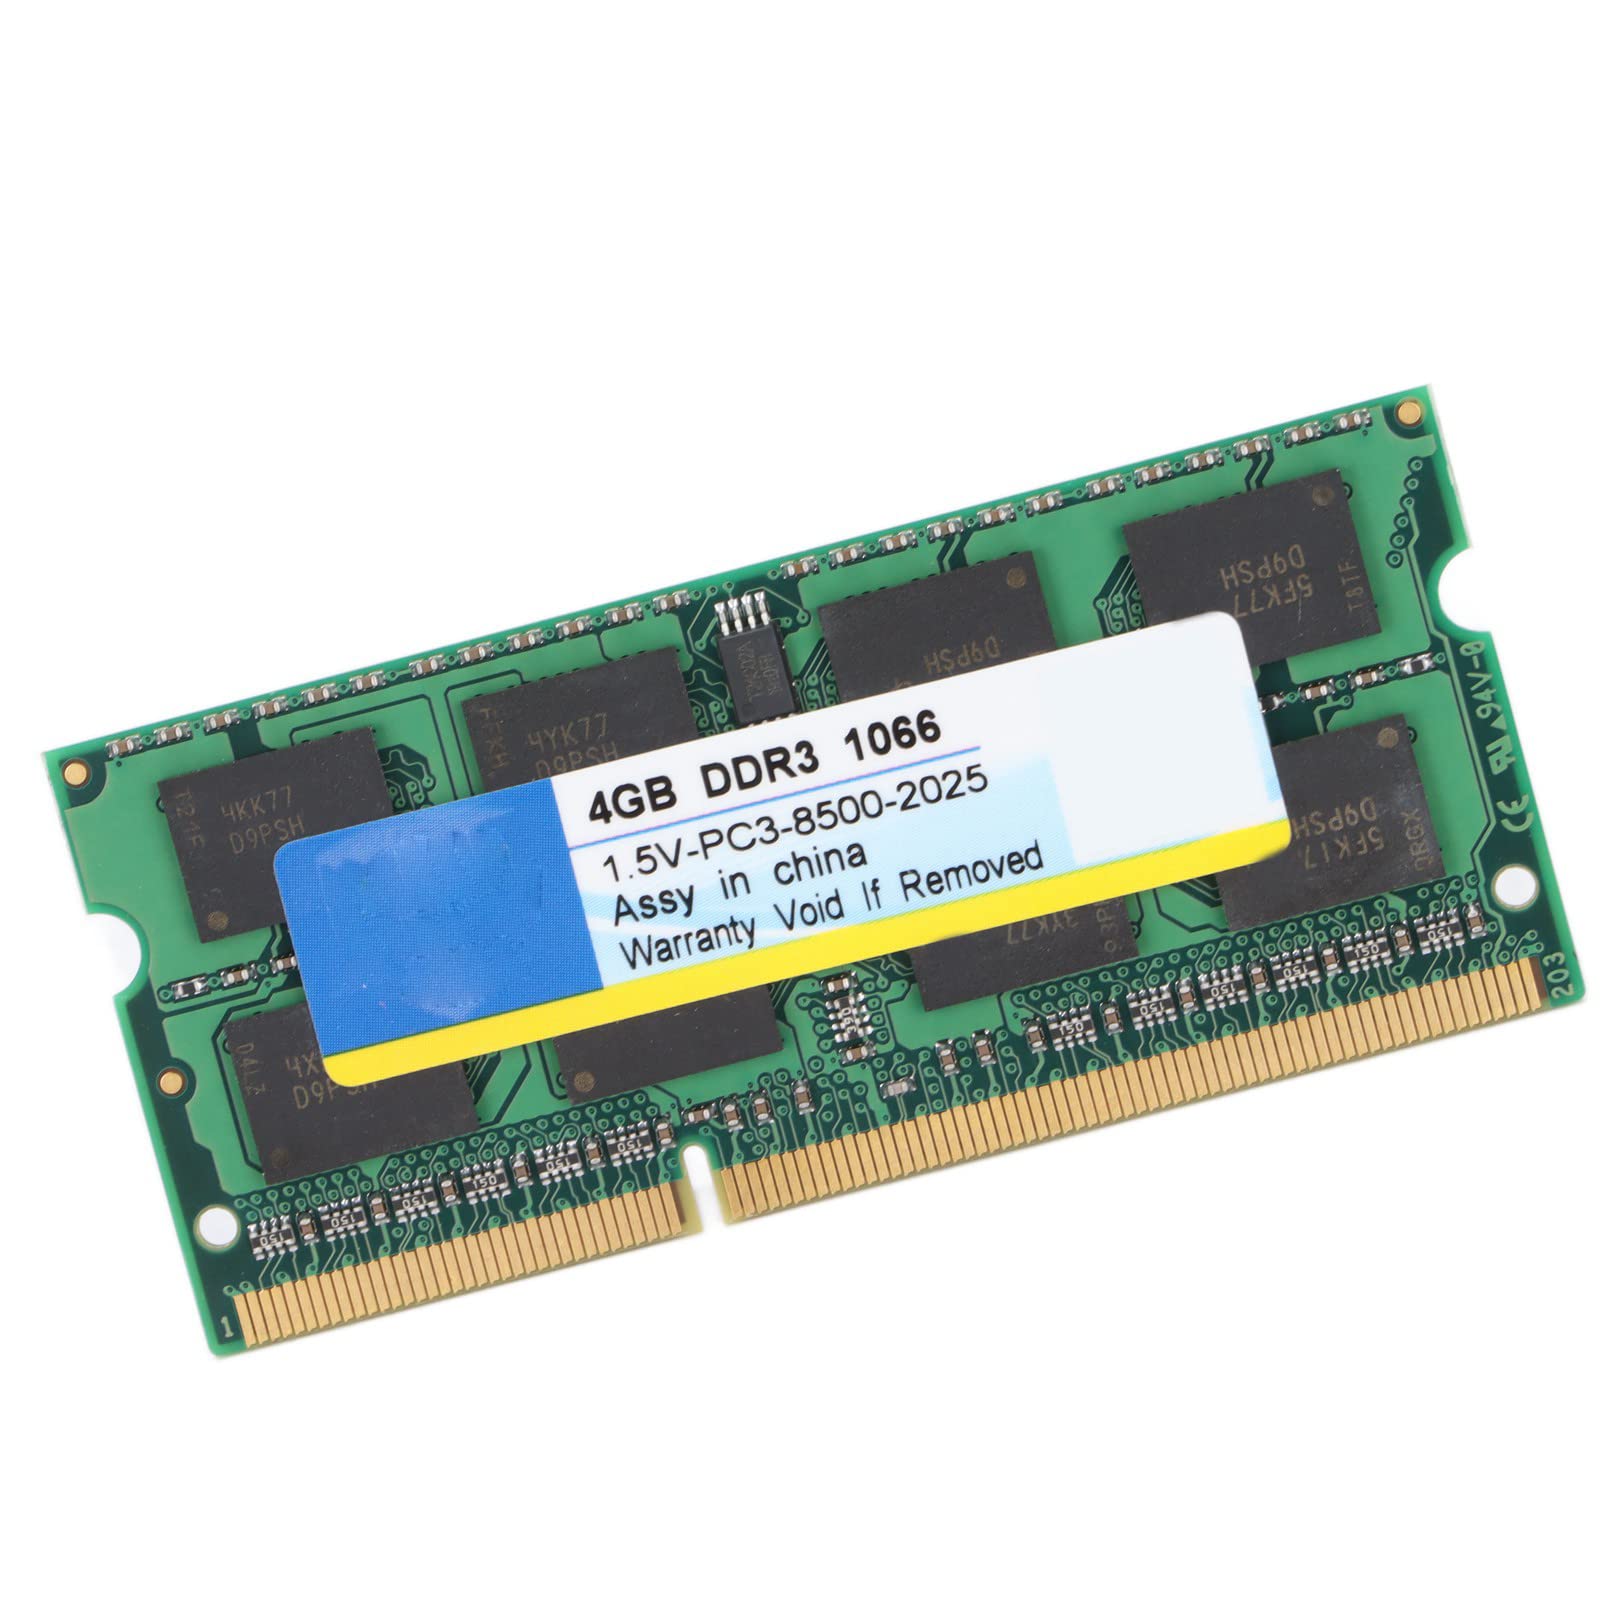 15 Best PC3-8500 DDR3 1066 Mhz Type RAM For 2024